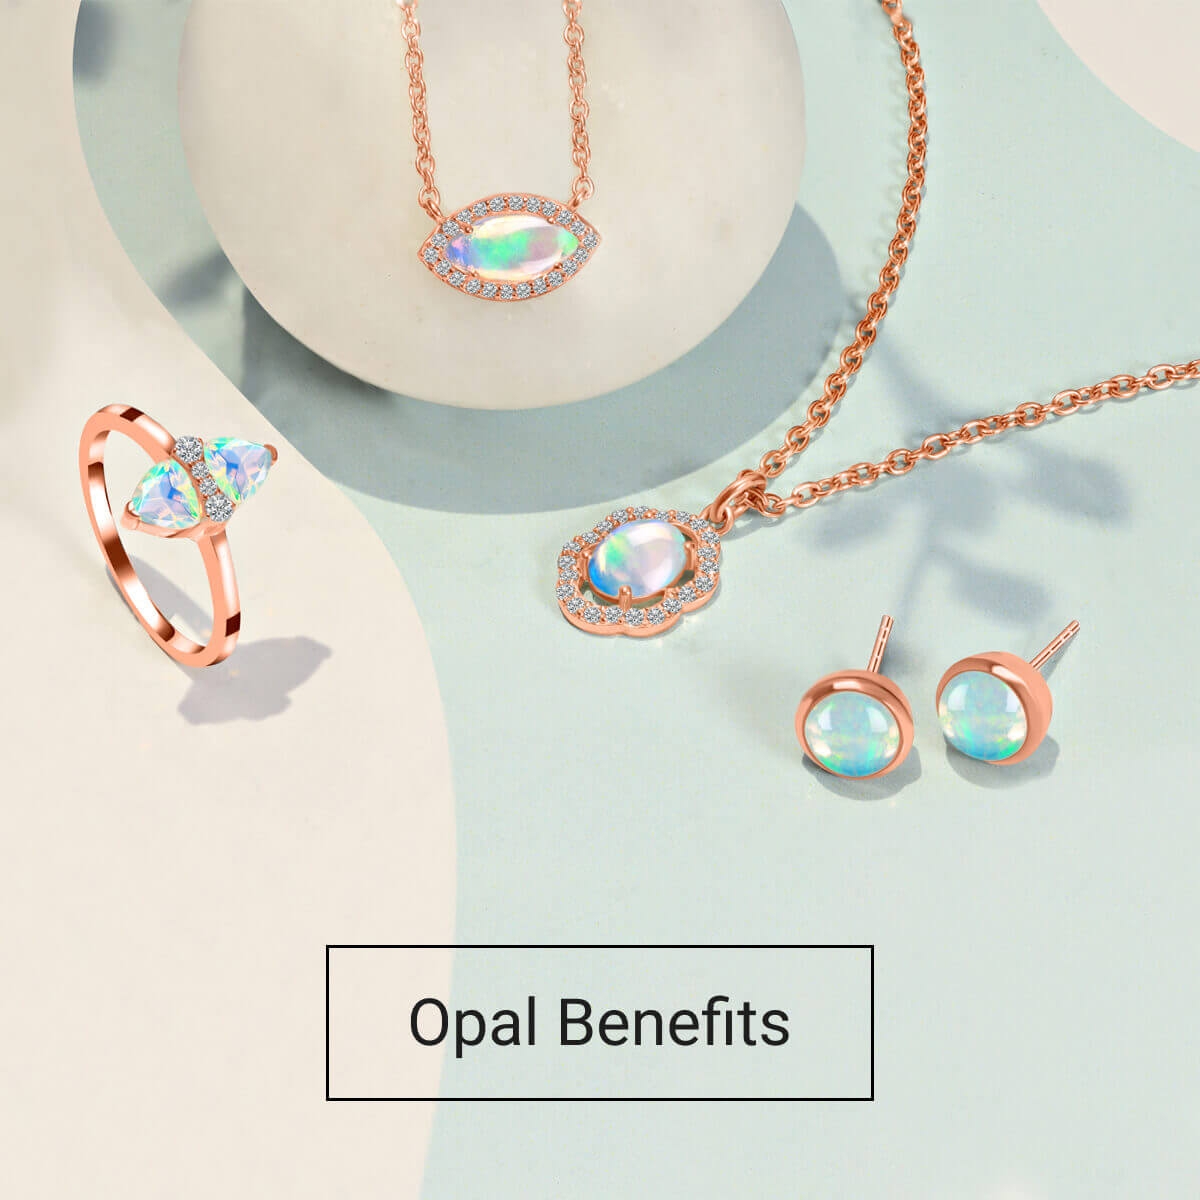 The Mesmerizing Benefits Of Opal